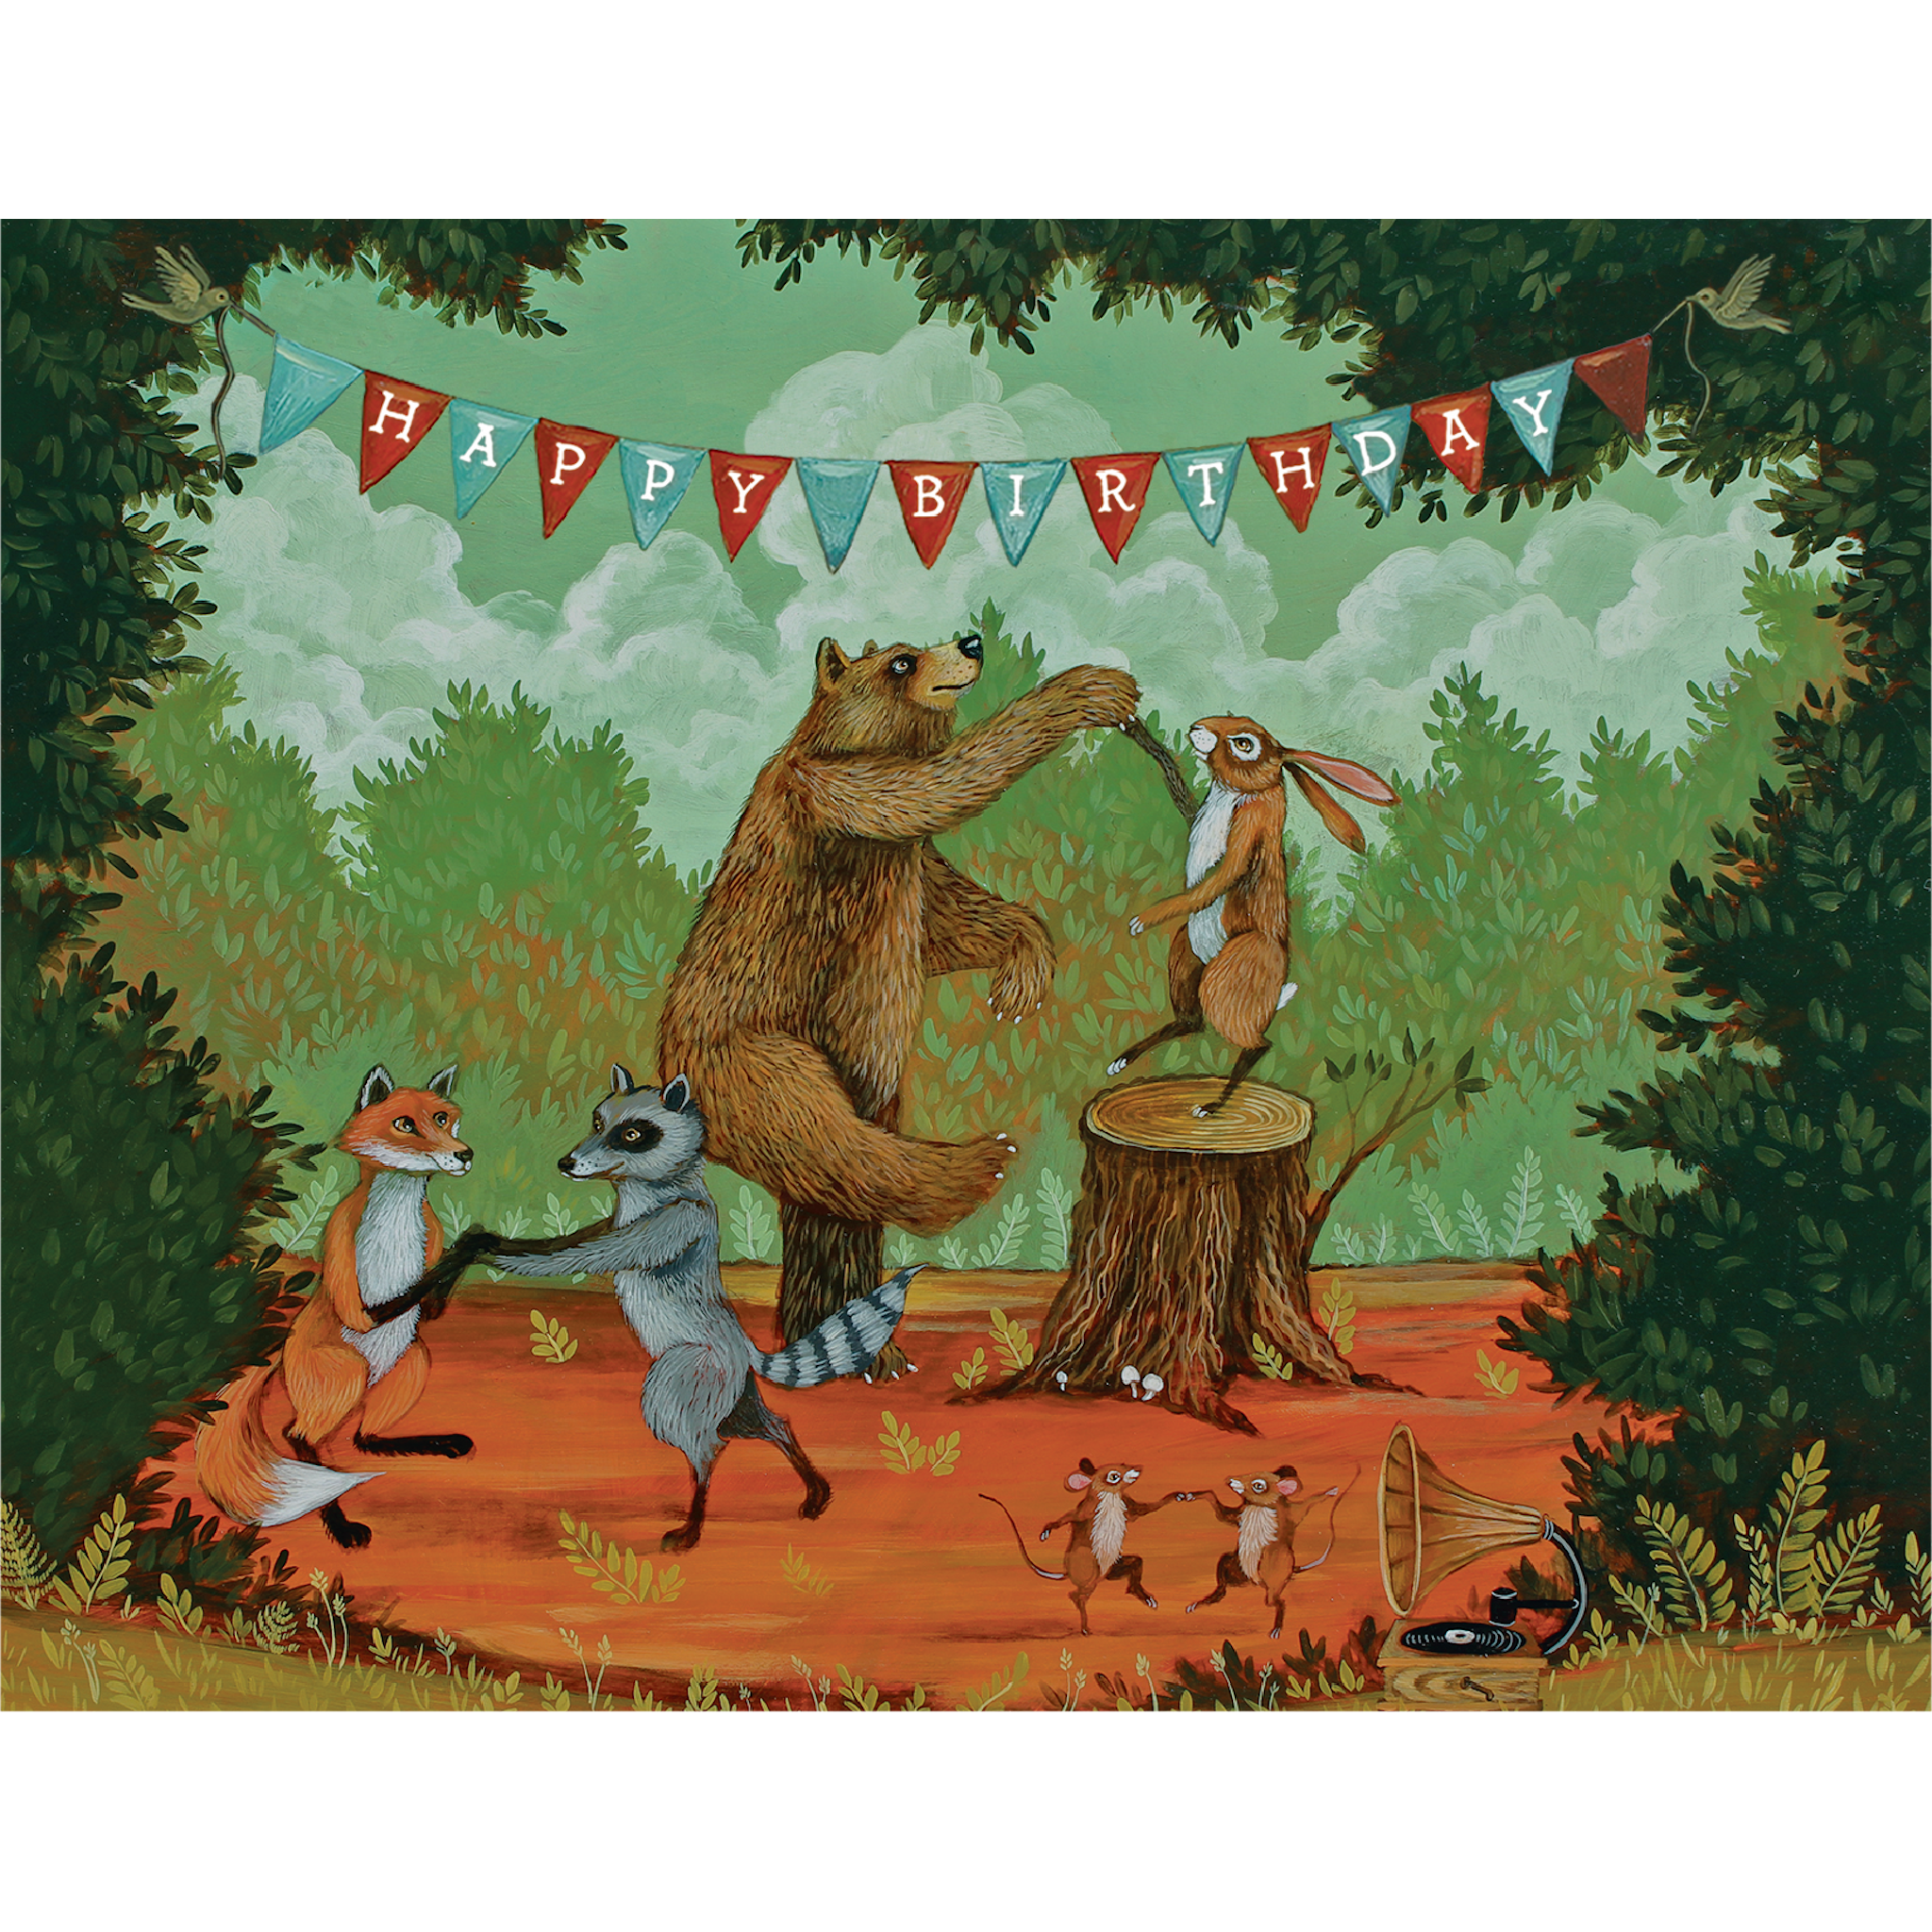 A whimsical illustration of a forest dance party featuring a bear, rabbit, fox, raccoon and mice having fun under a banner that says &quot;HAPPY BIRTHDAY&quot;.